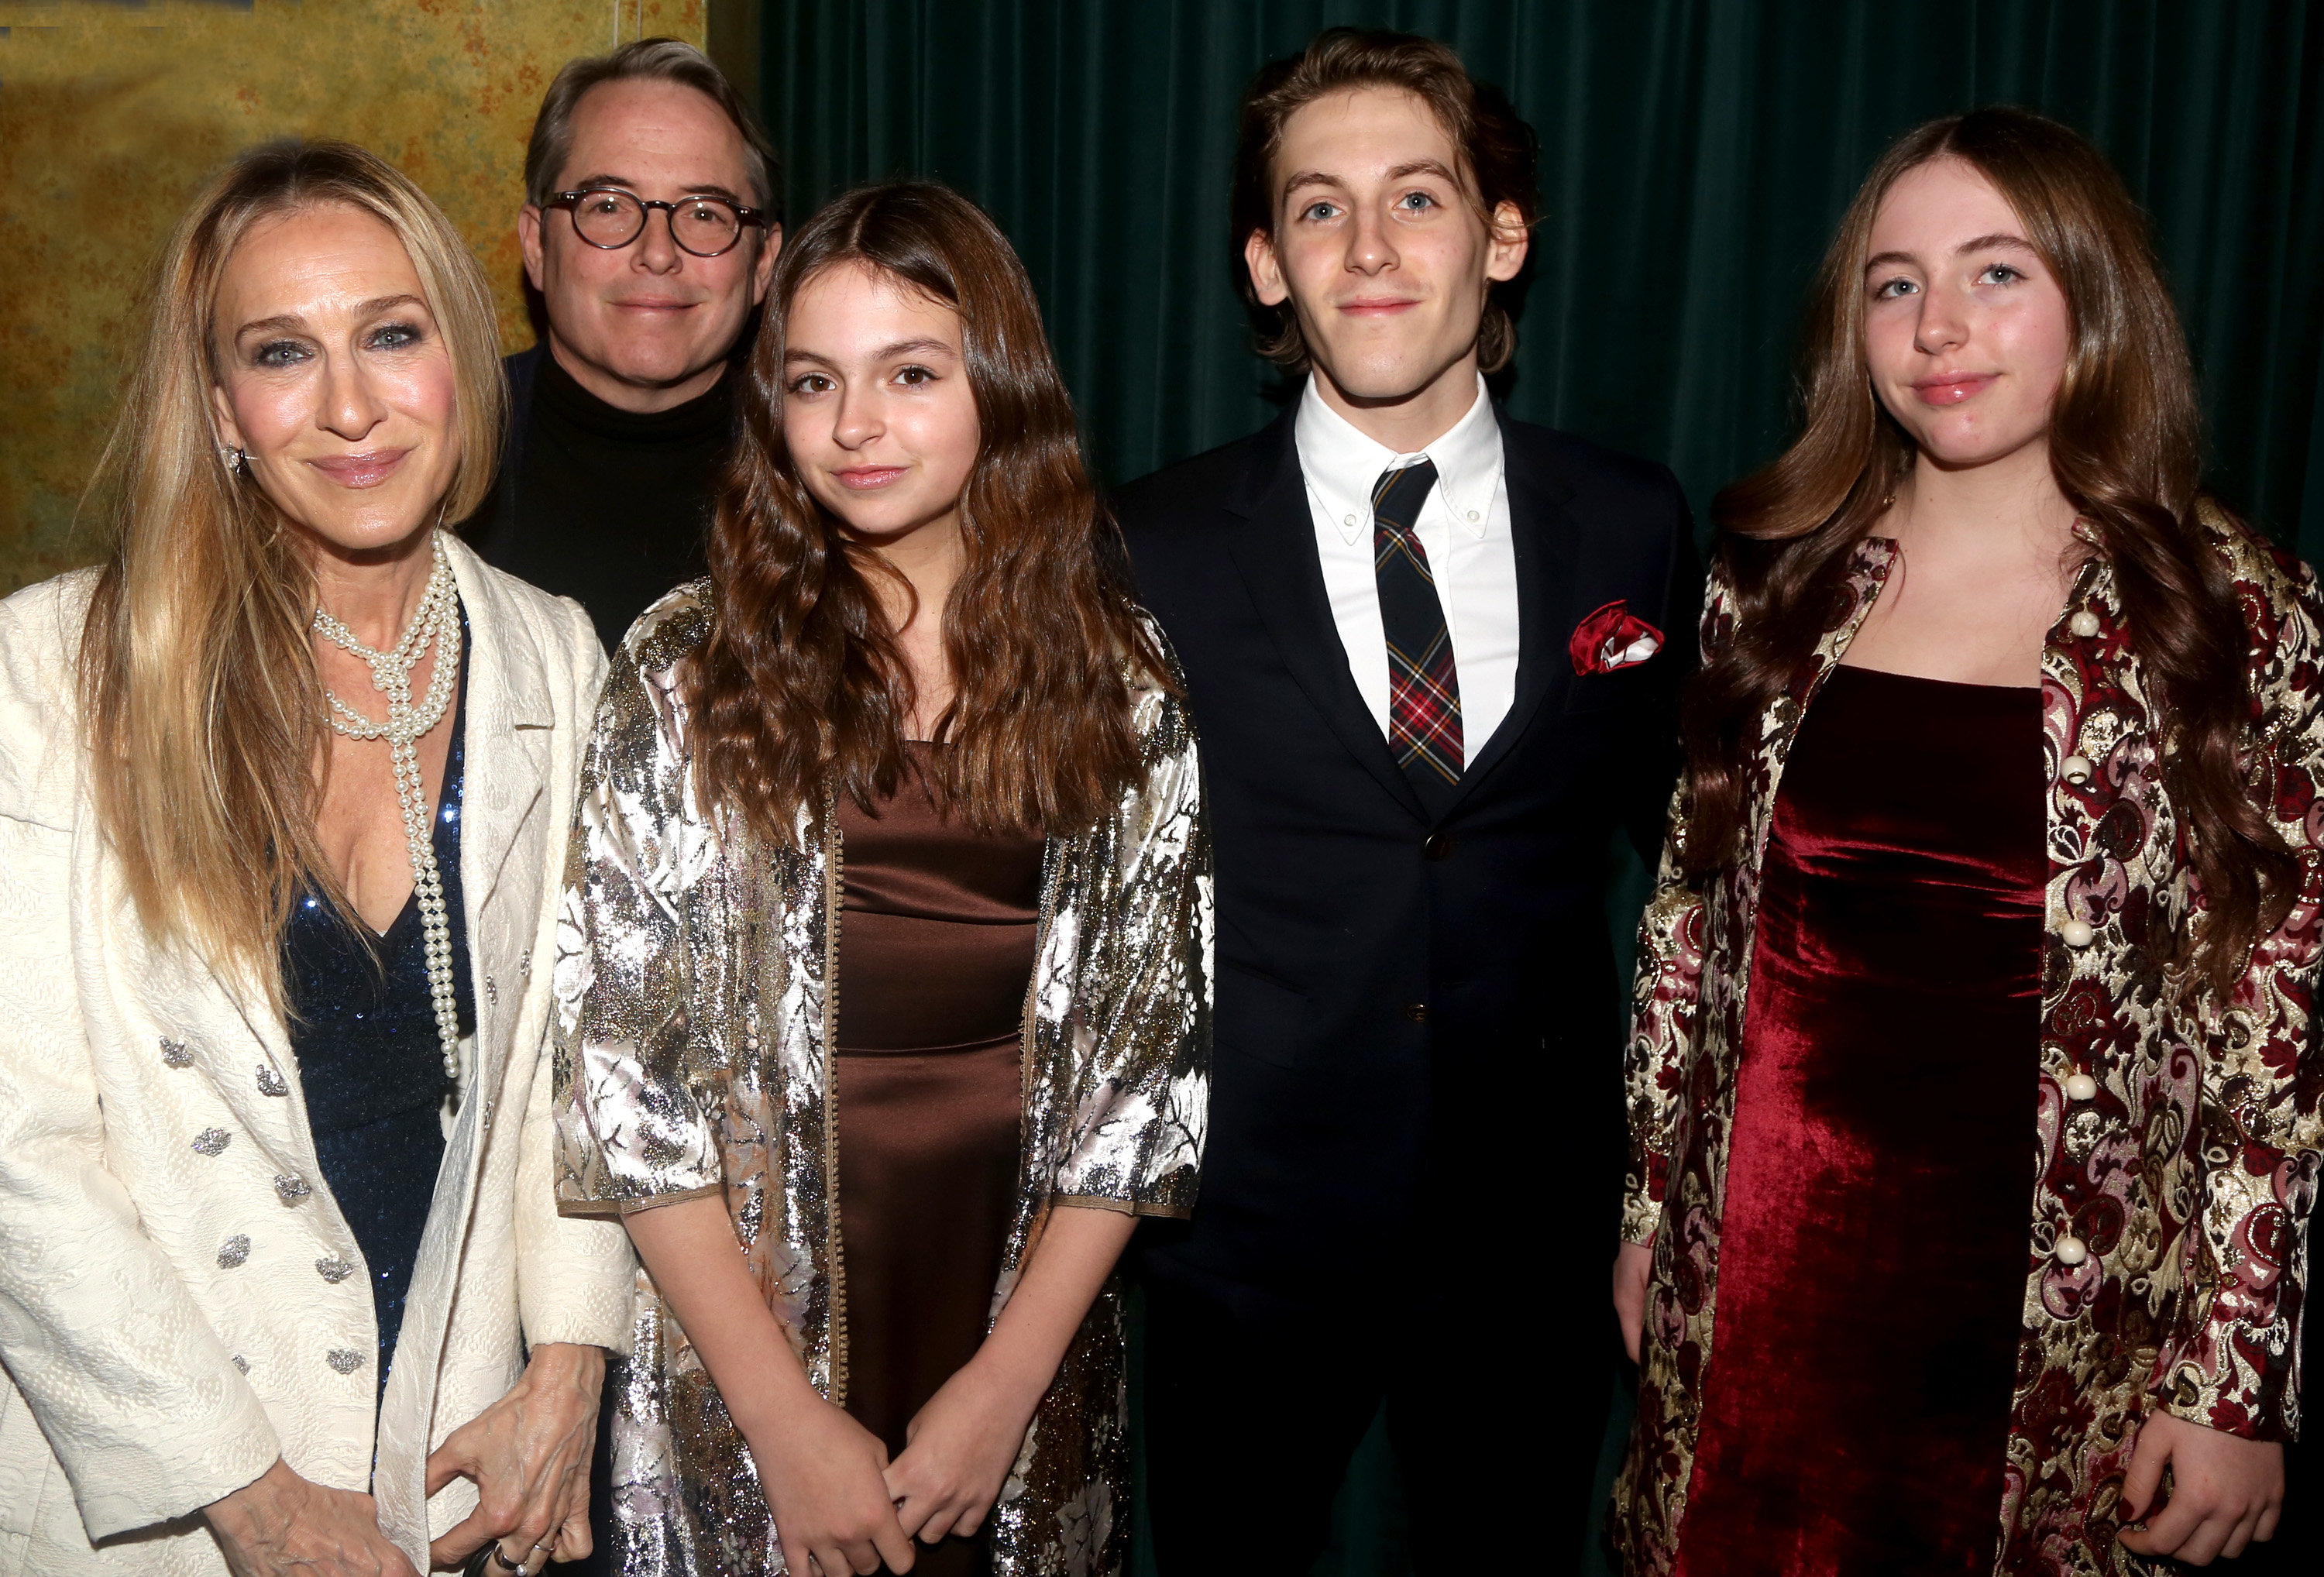 Sarah Jessica Parker with her husband Matthew Broderick, daughters Tabitha and Marion, and son James on the red carpet